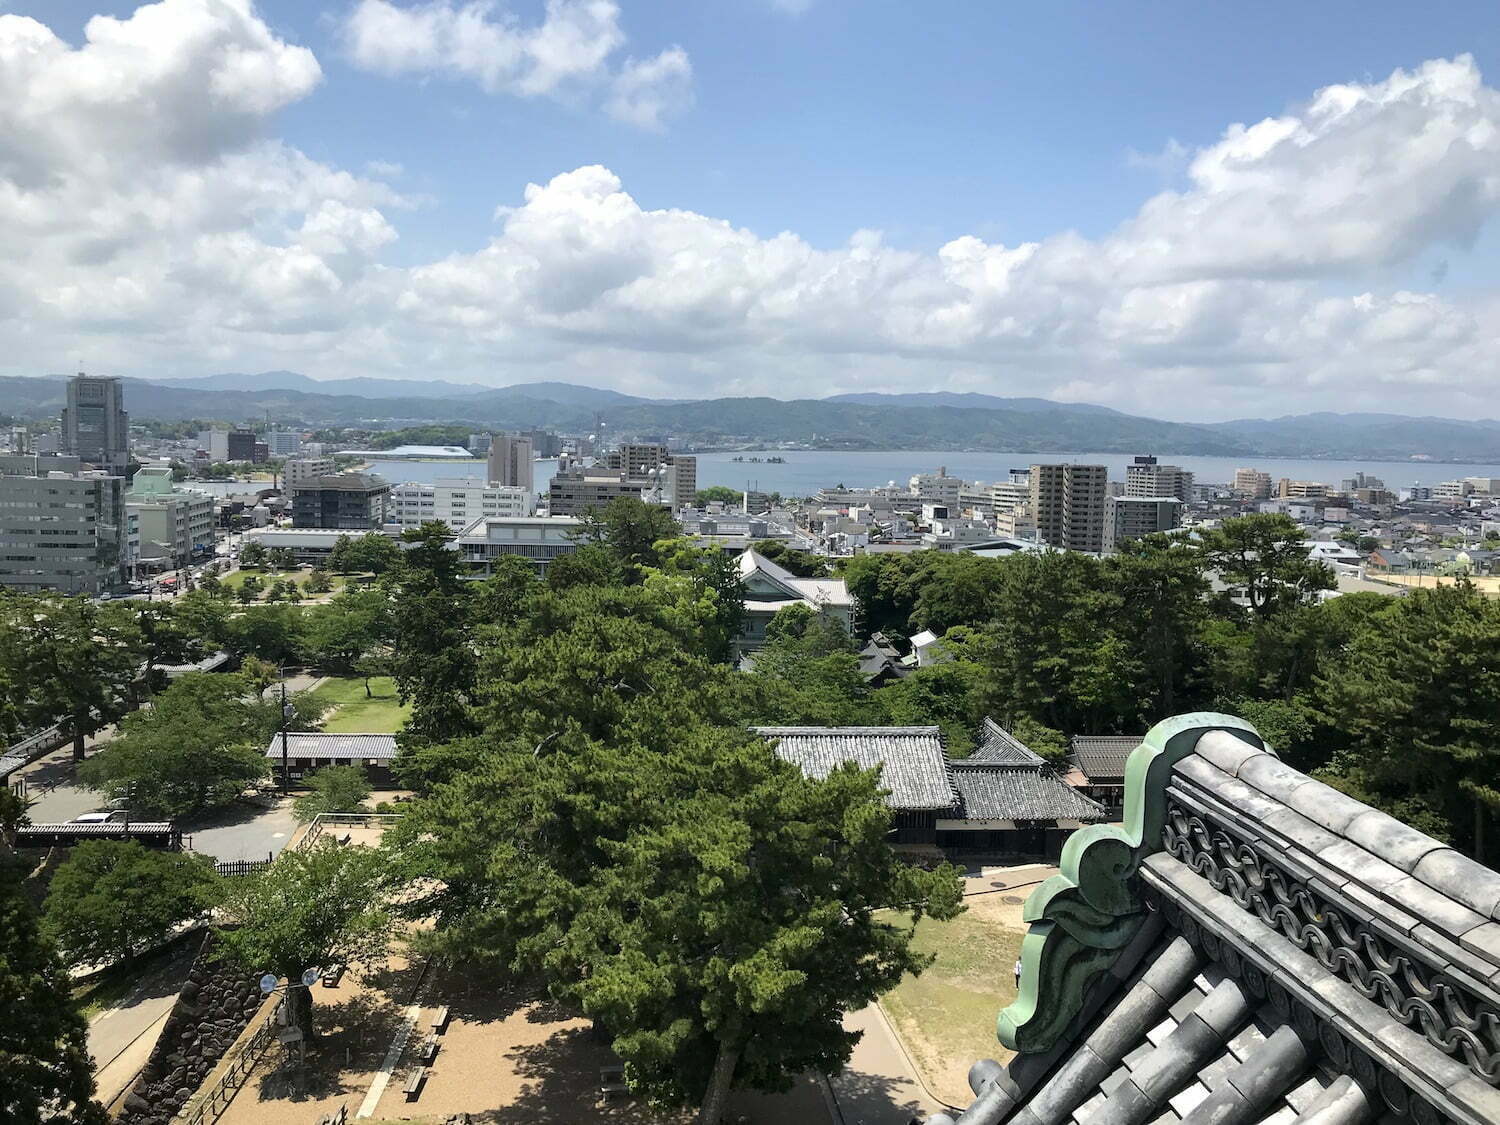 The view from Top of the Castle tower